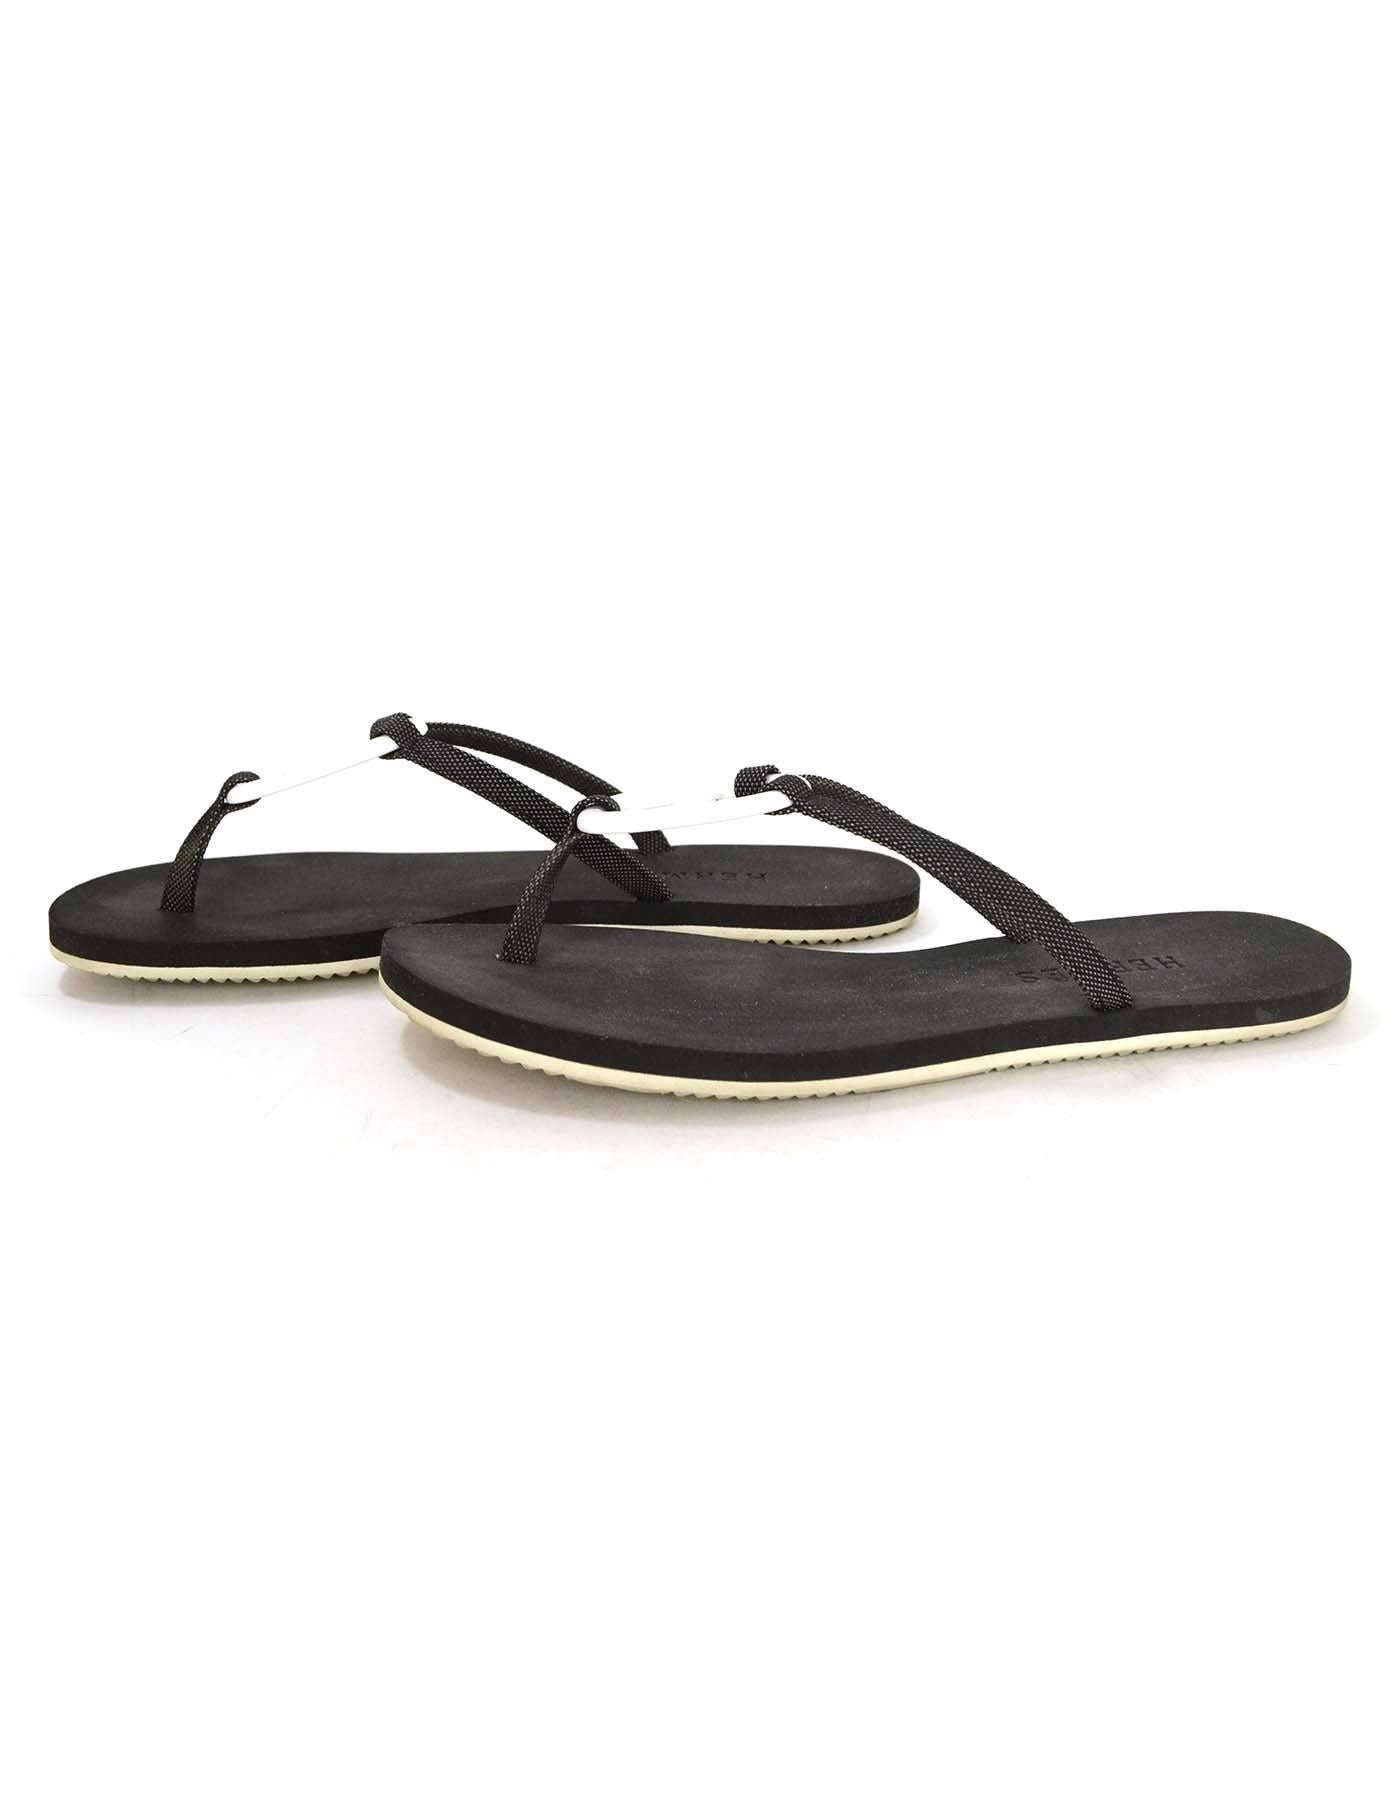 Hermes Black & White Kala Nera Ancre Flip Flops 
Made In: Spain
Color: Black and white
Materials: Rubber/foam, canvas and resin
Closure/Opening: Slip on
Sole Stamp: Made in Spain CAOUTCHOUC
Retail Price: $430 + tax
Overall Condition: